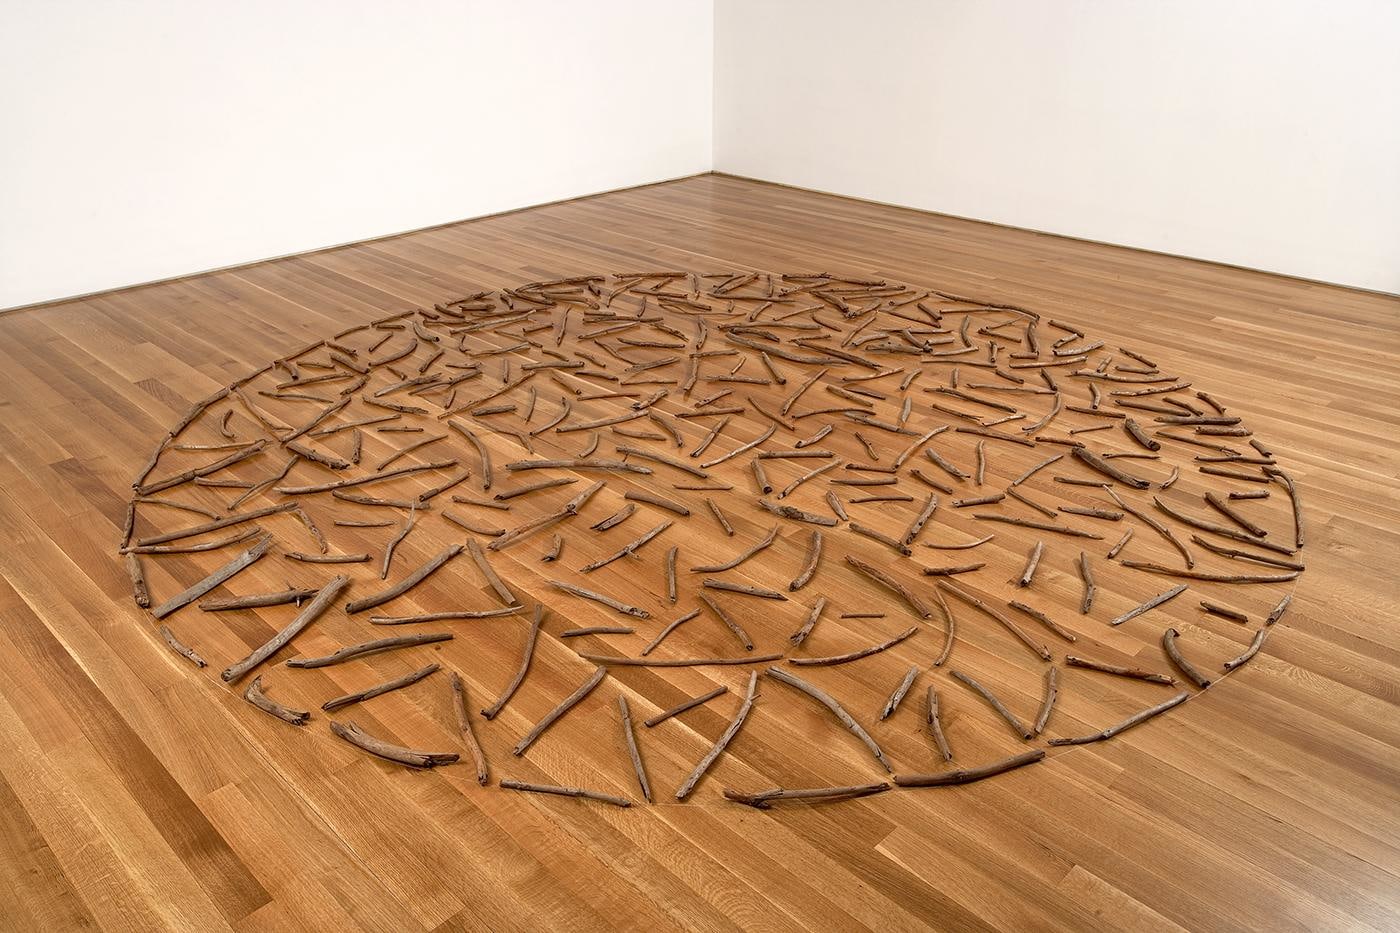 Richard Long
Quantock Wood Circle, 1981
286 pieces of wood
192 inches diameter (488 cm)
SW 81009